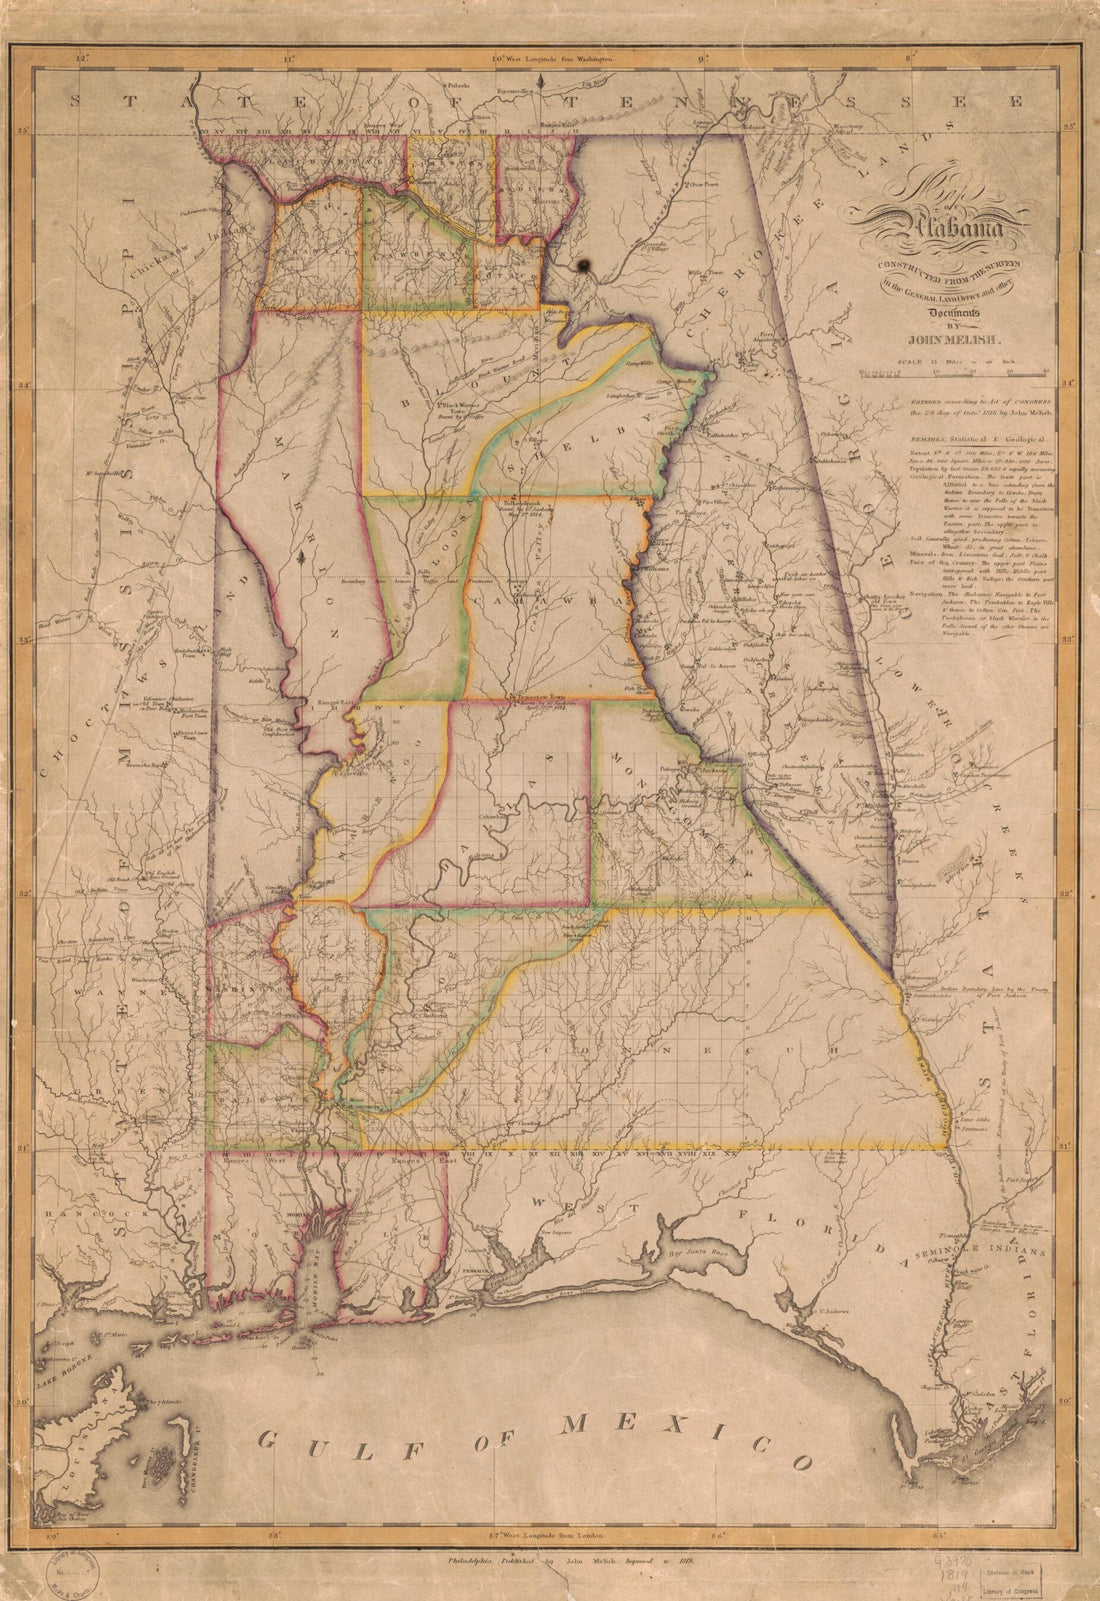 This old map of Map of Alabama Constructed from the Surveys In the General Land Office and Other Documents. Improved to from 1819 was created by John Melish in 1819